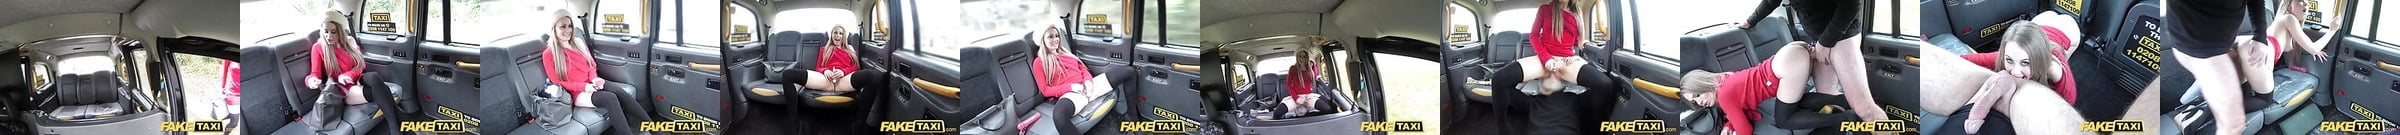 Fake Taxi Panty Stuffing Redhead Love A Good Rough